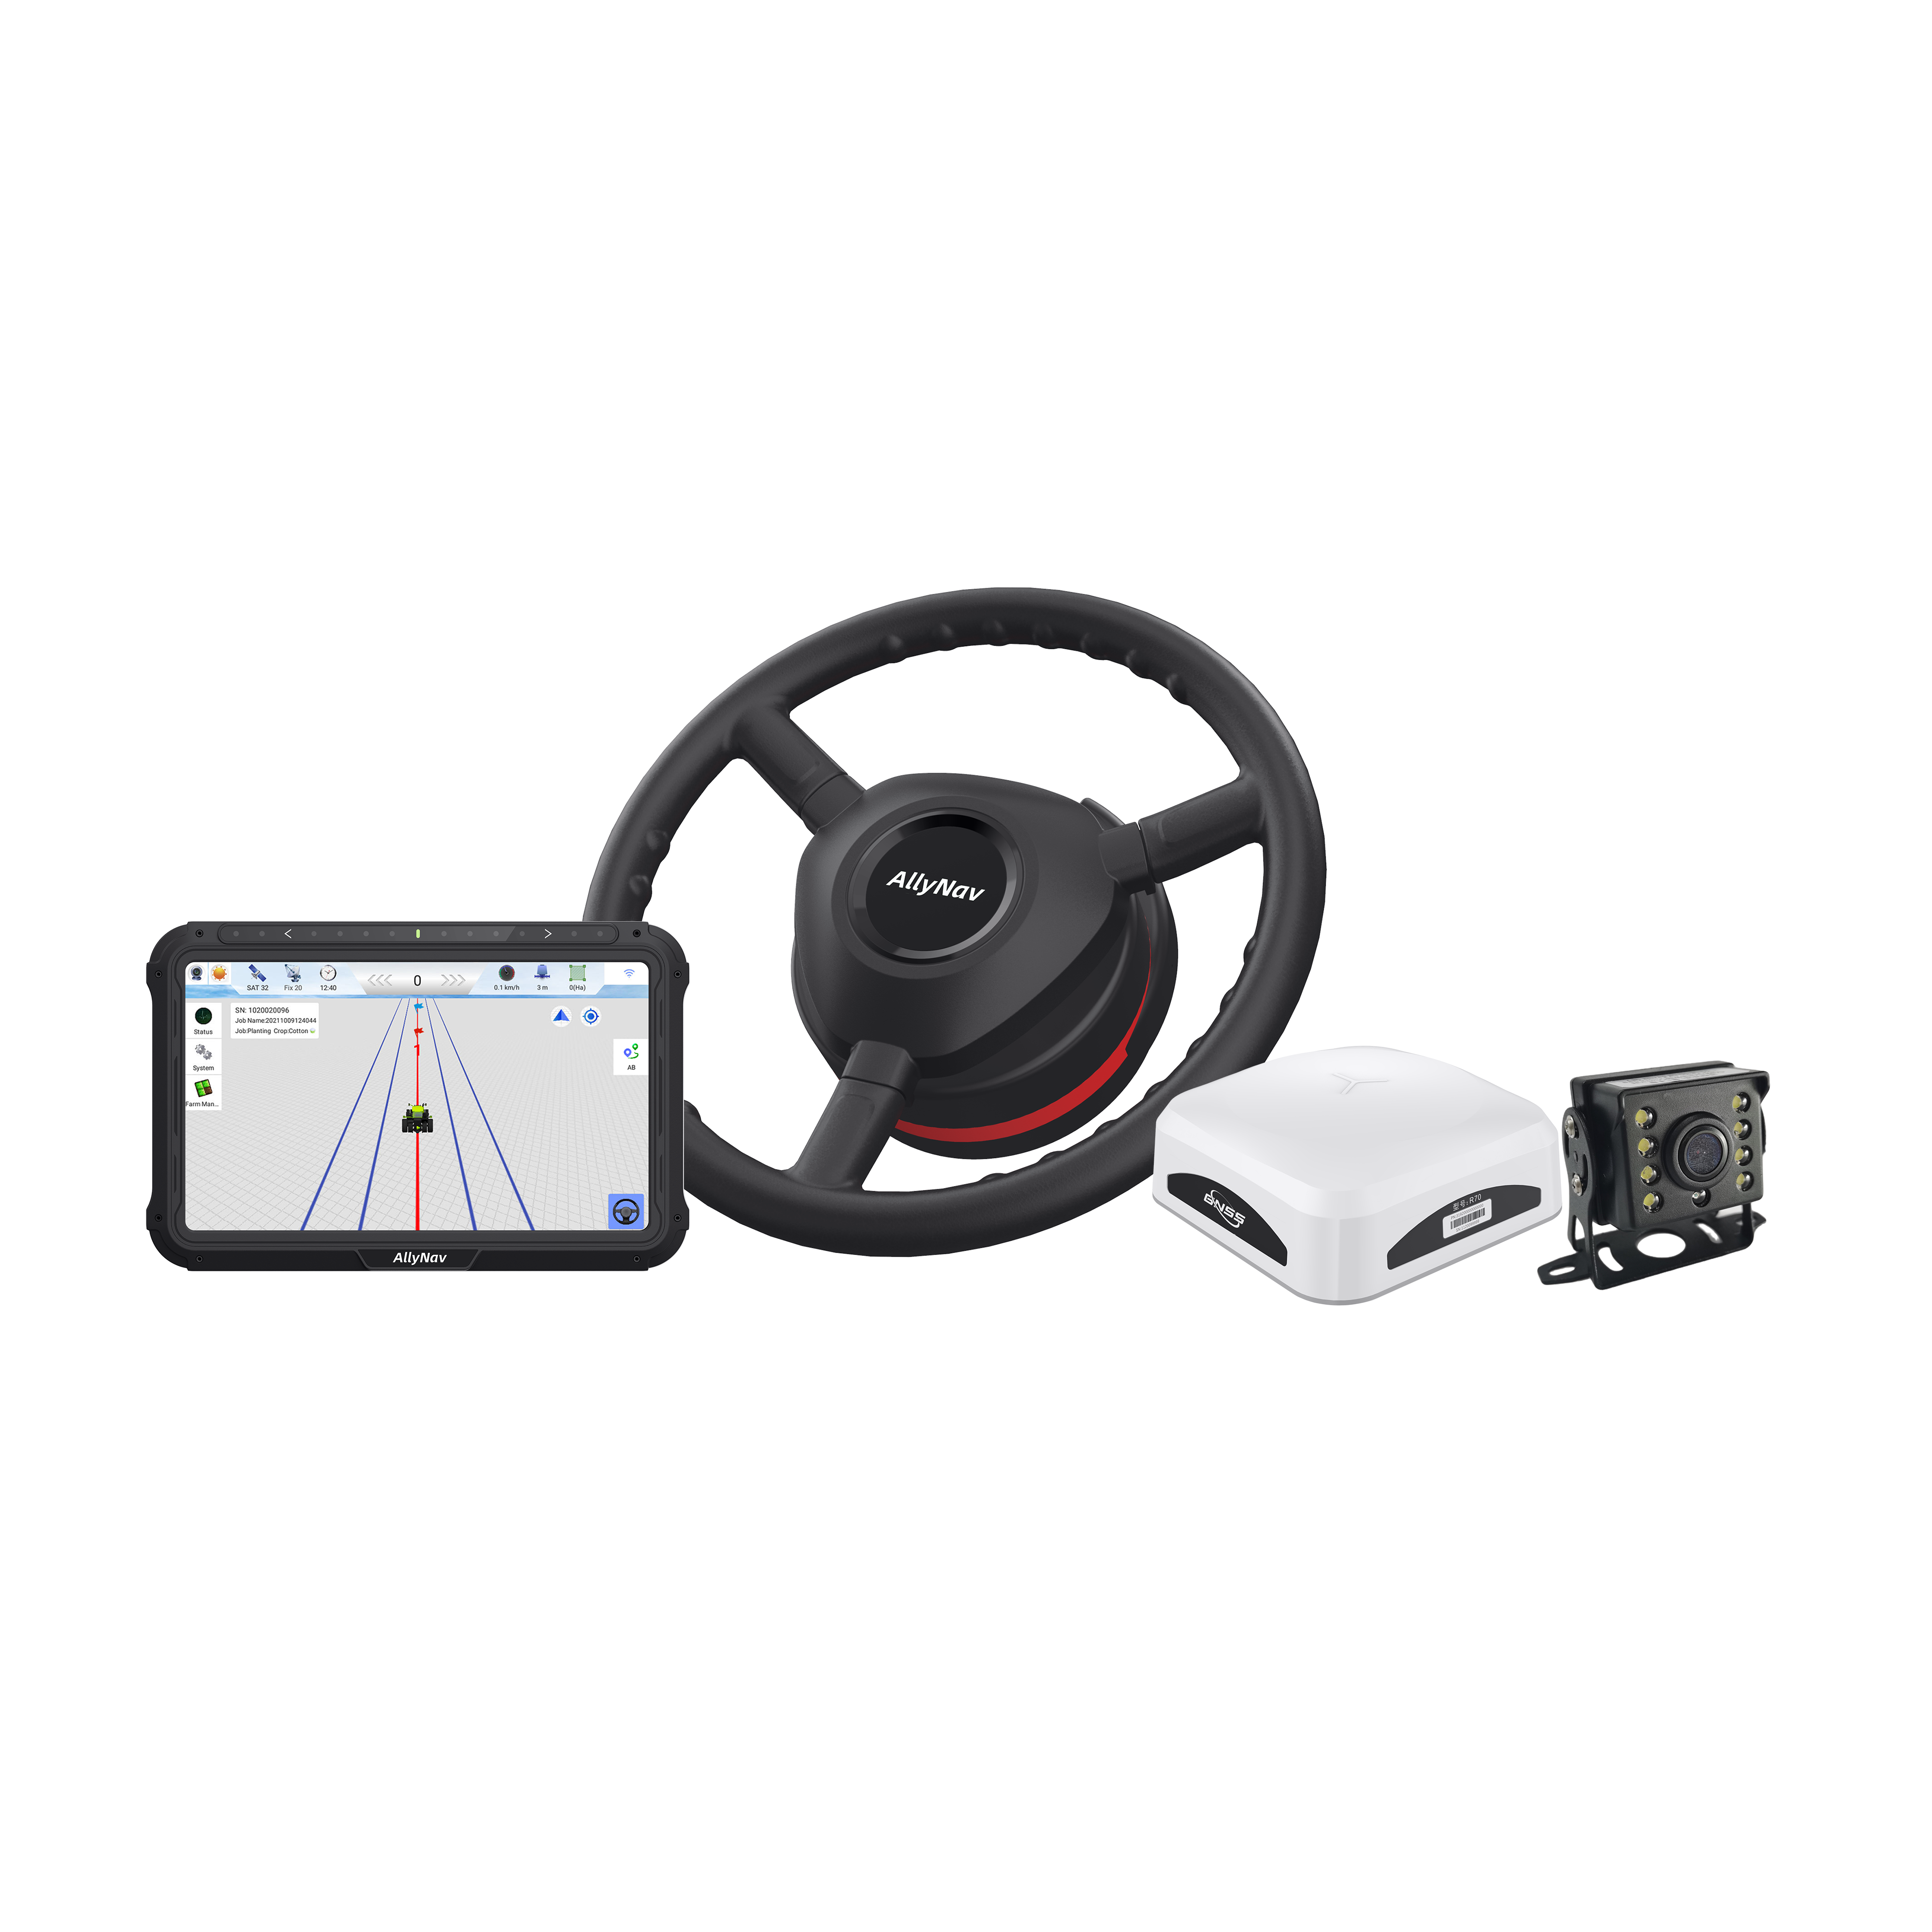  AF305 GNSS Auto-Steering System